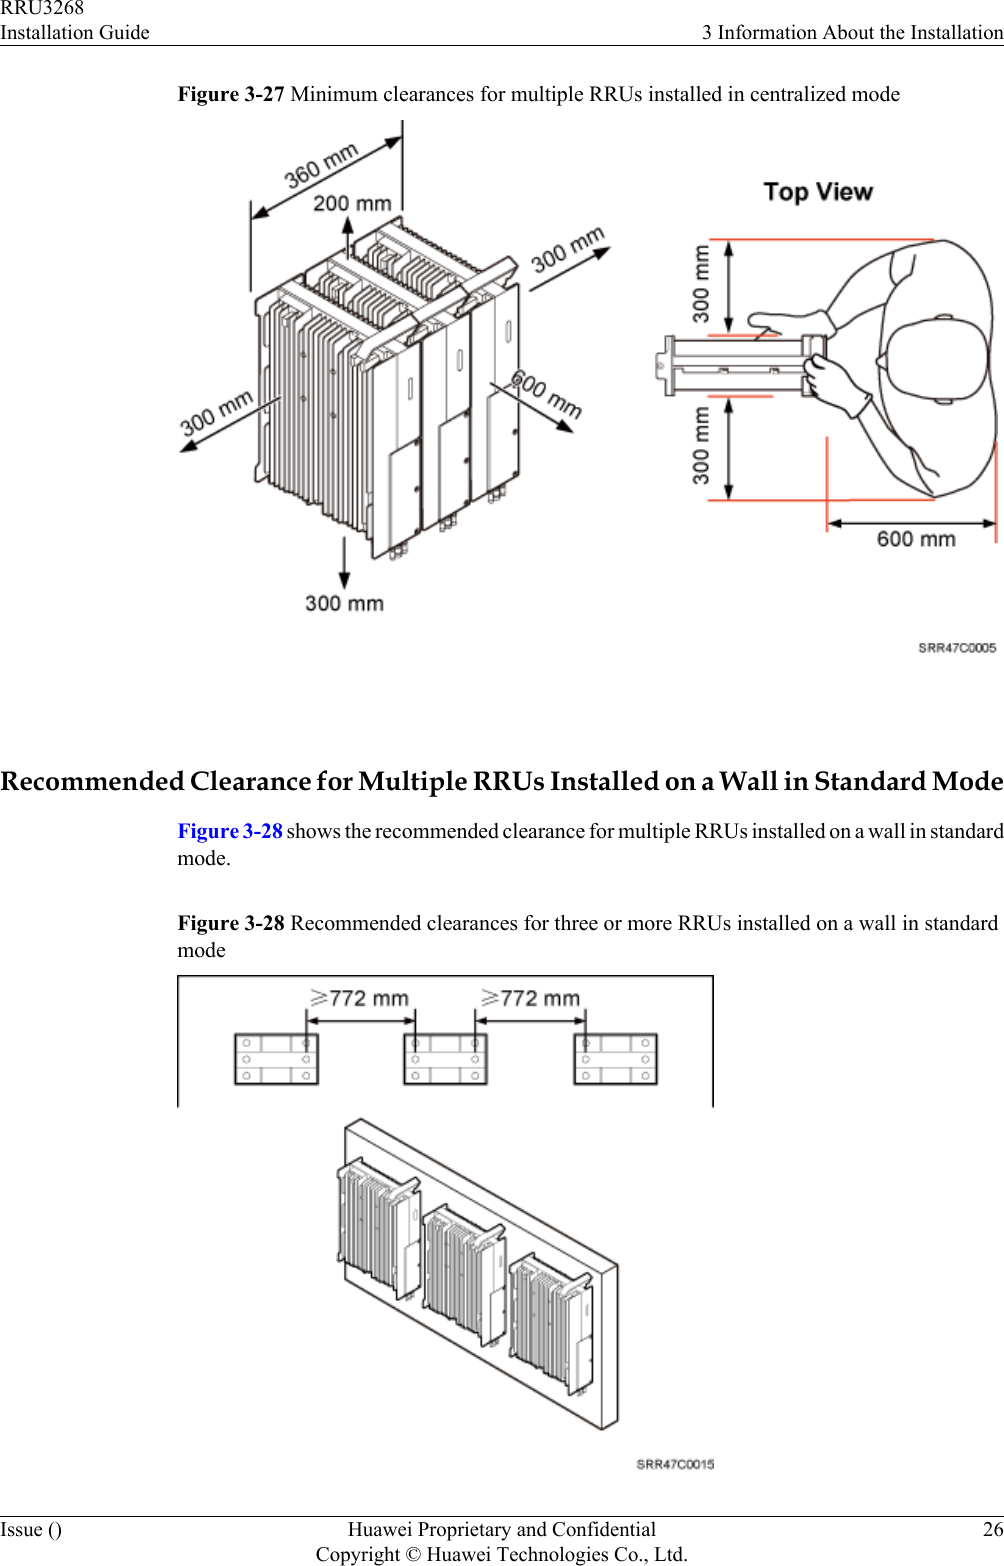 Figure 3-27 Minimum clearances for multiple RRUs installed in centralized mode Recommended Clearance for Multiple RRUs Installed on a Wall in Standard ModeFigure 3-28 shows the recommended clearance for multiple RRUs installed on a wall in standardmode.Figure 3-28 Recommended clearances for three or more RRUs installed on a wall in standardmodeRRU3268Installation Guide 3 Information About the InstallationIssue () Huawei Proprietary and ConfidentialCopyright © Huawei Technologies Co., Ltd.26